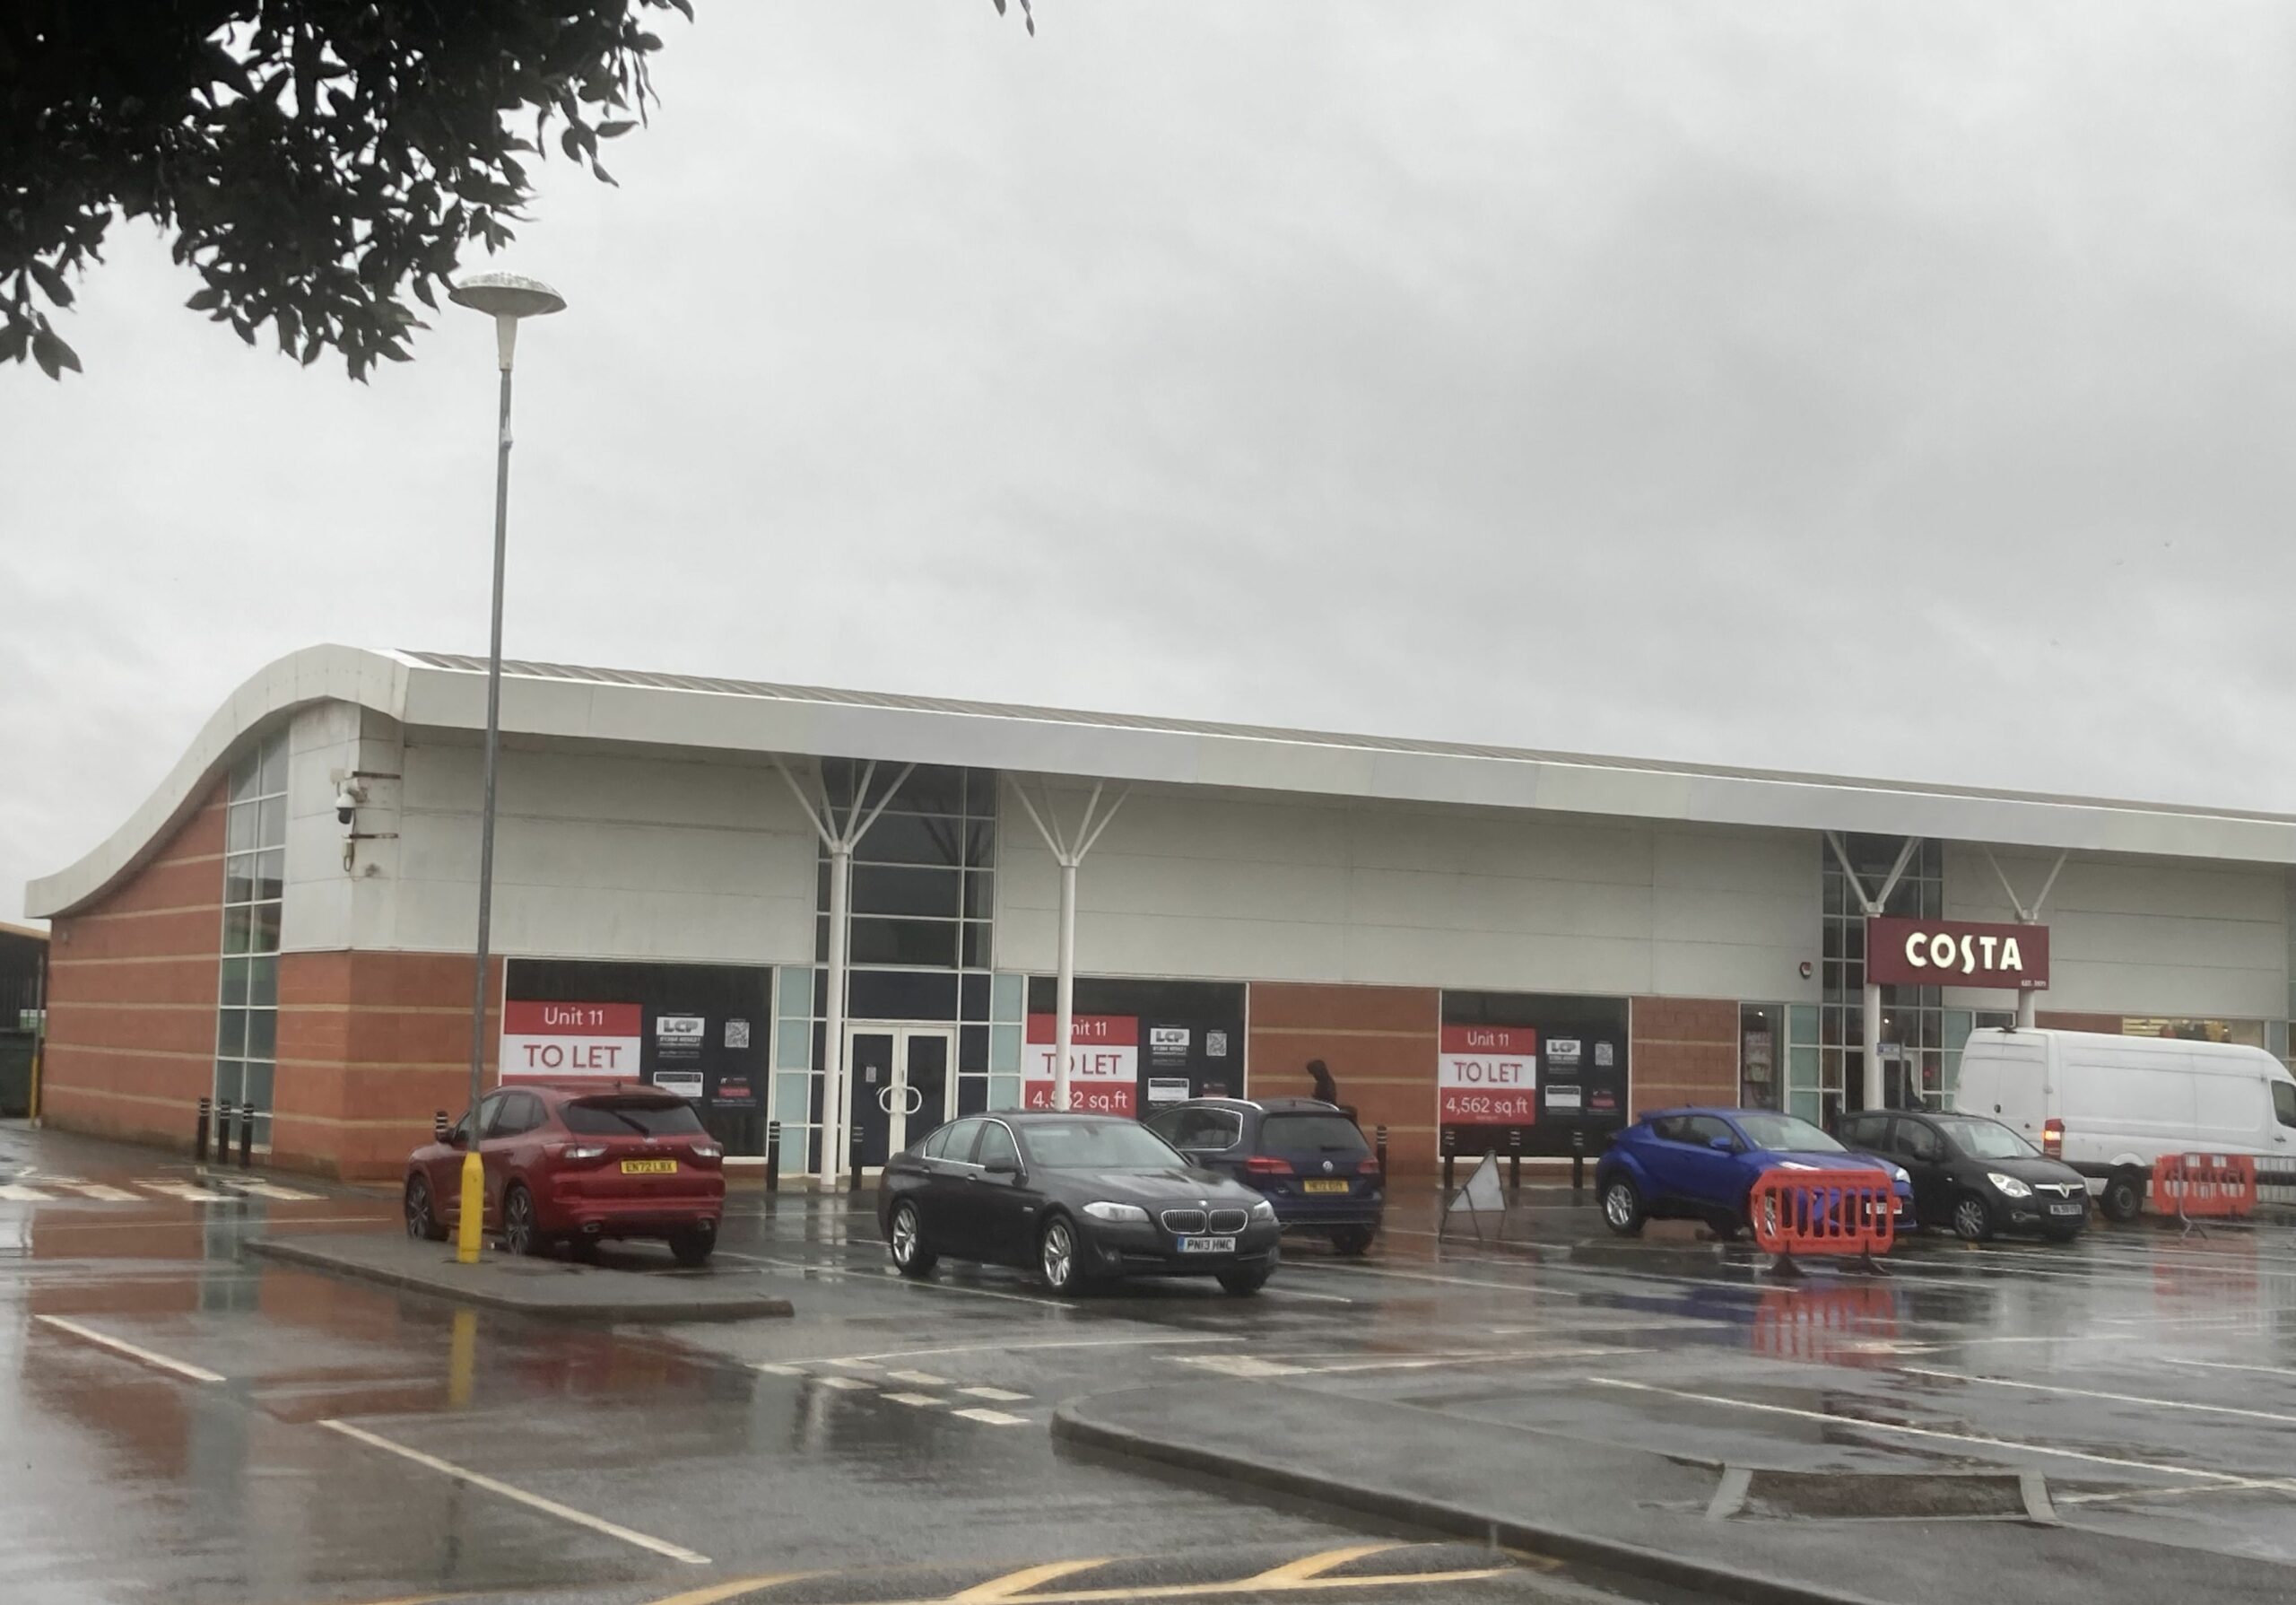 The site of the proposed new McDonald's restaurant and takeaway at Central 12 retail park in Southport. Photo by Andrew Brown Stand Up For Southport